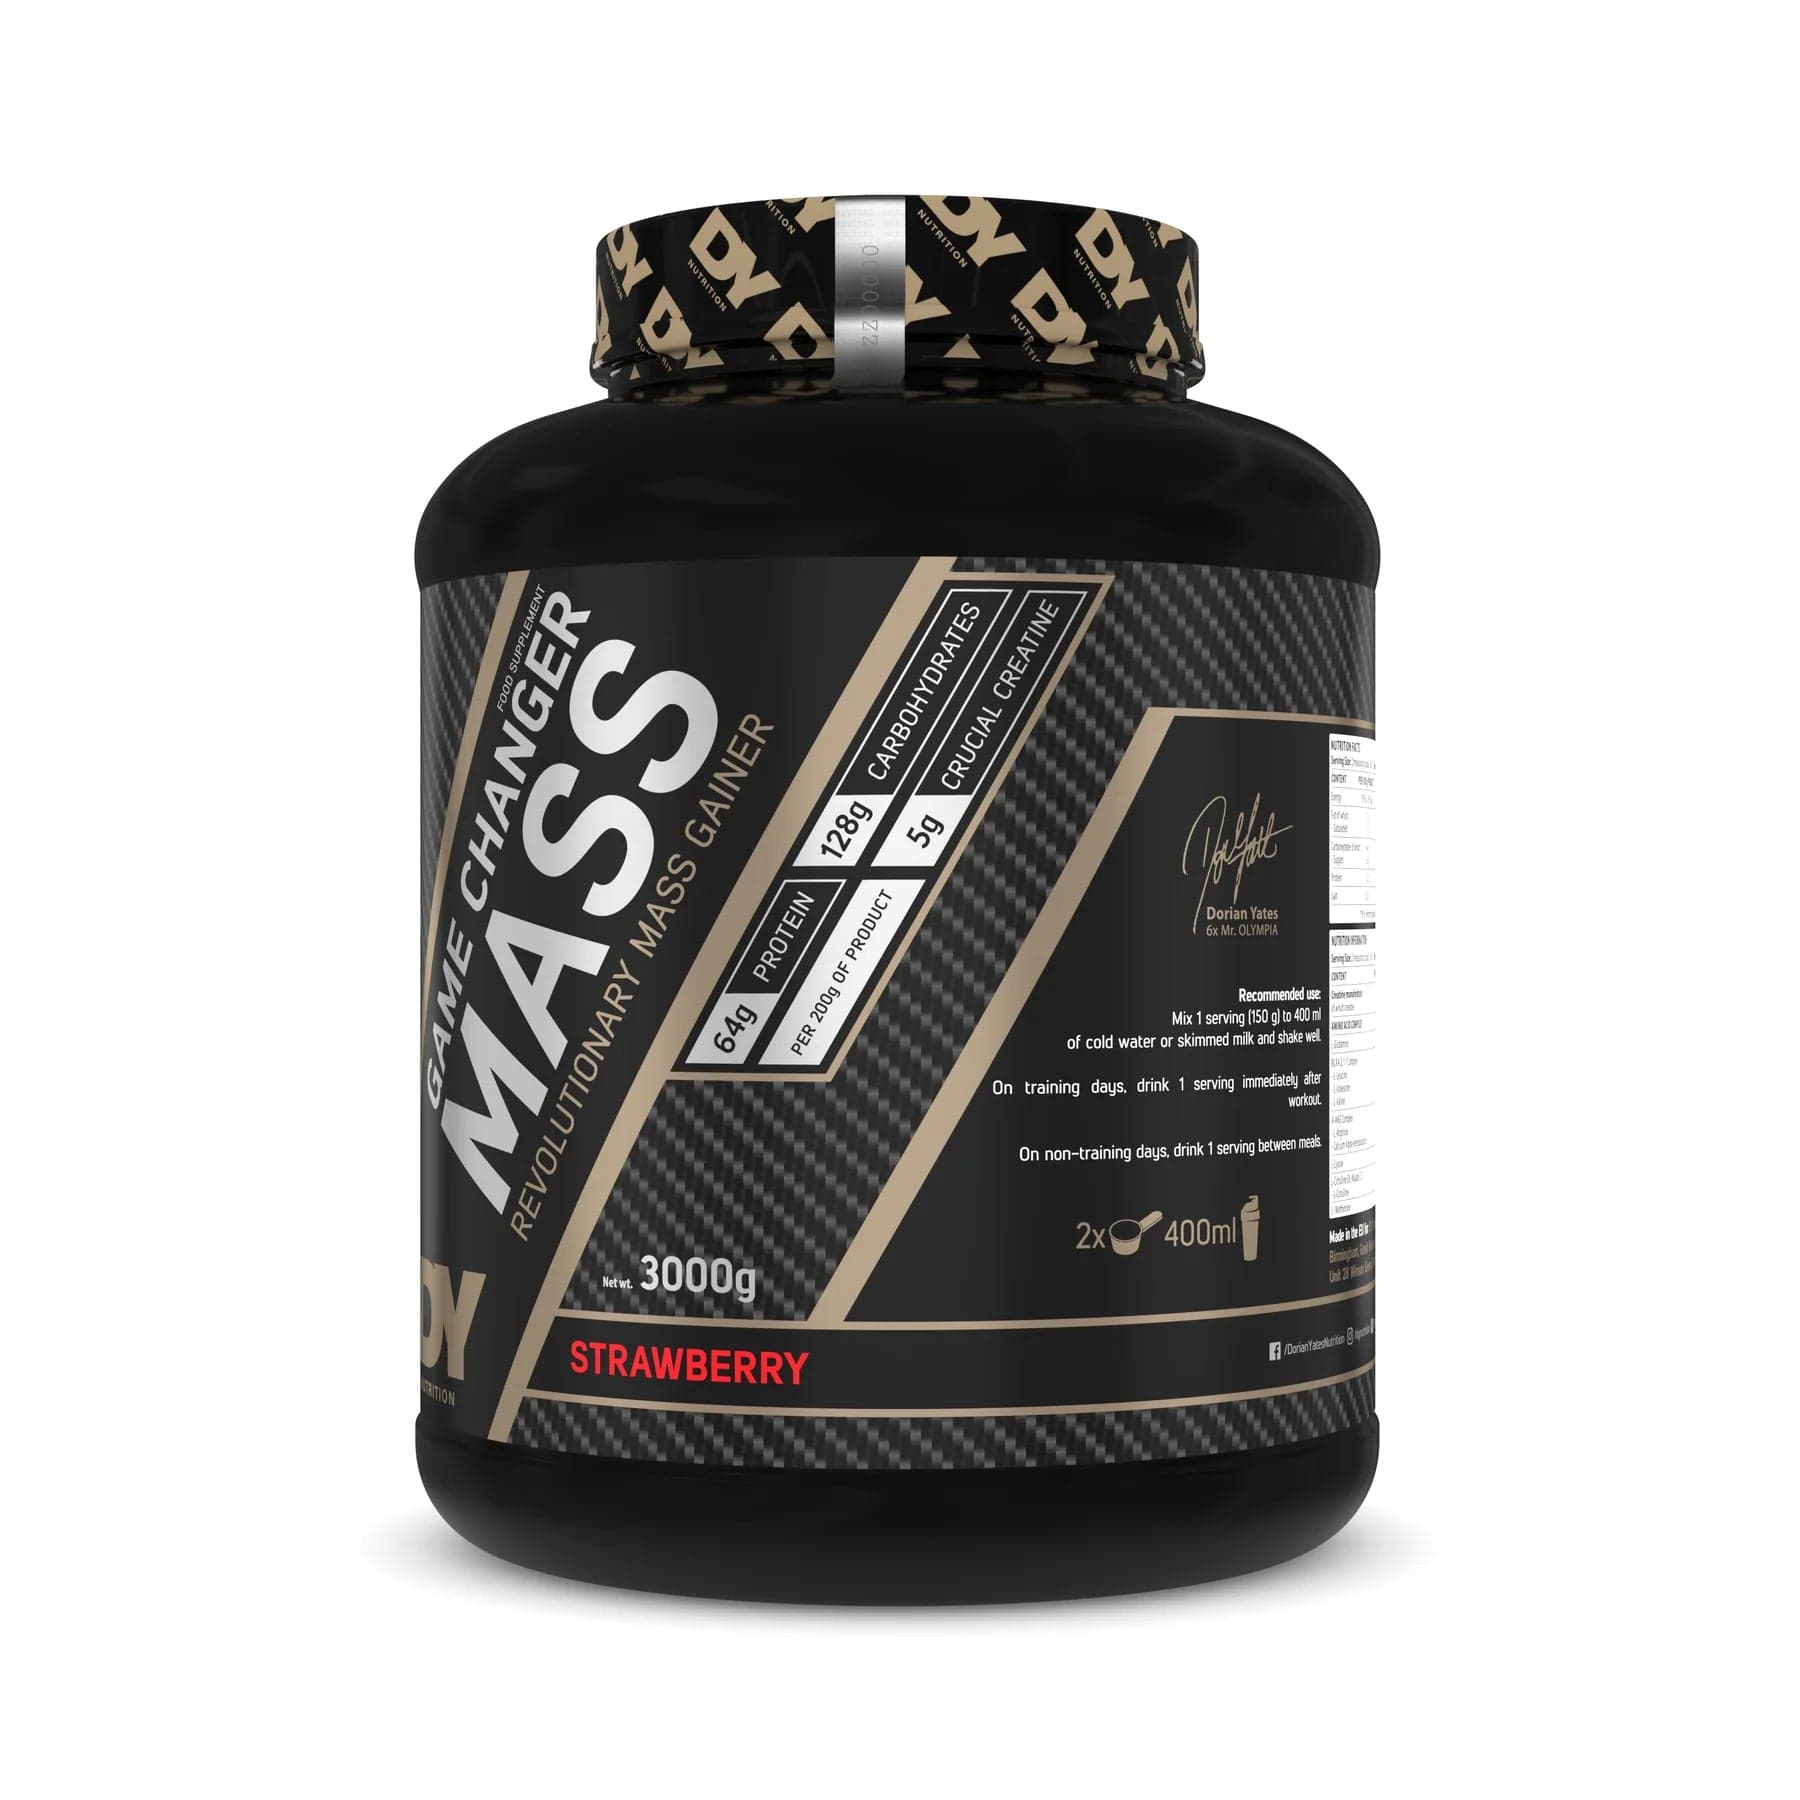 DY NutritionGame Changer Mass GainerMass GainerRED SUPPS